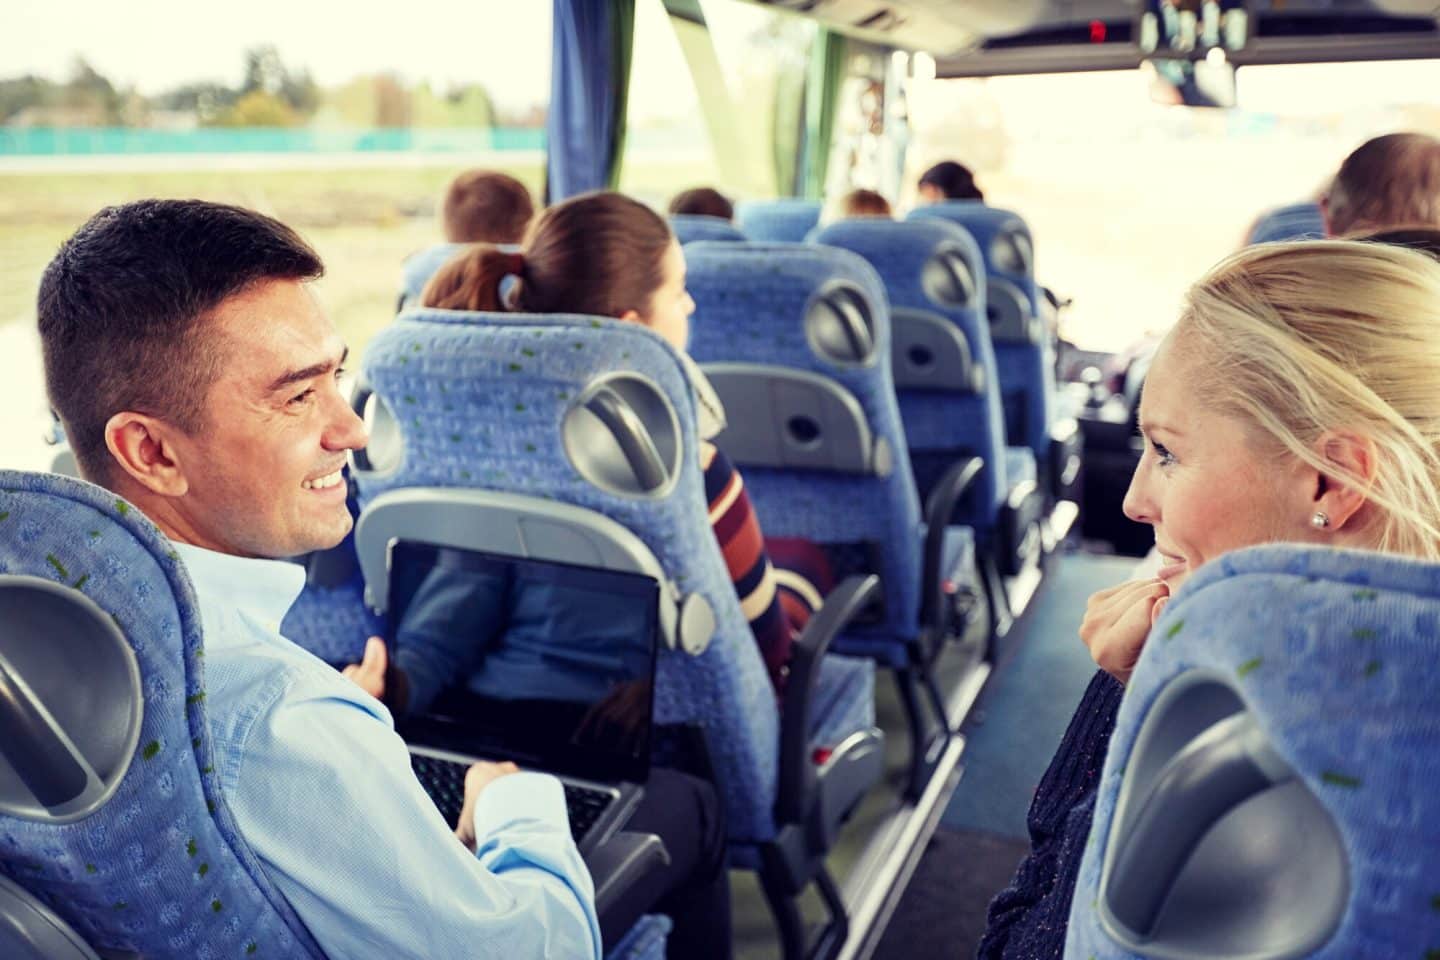 5 Benefits of Hiring a Bus for Your Church Group